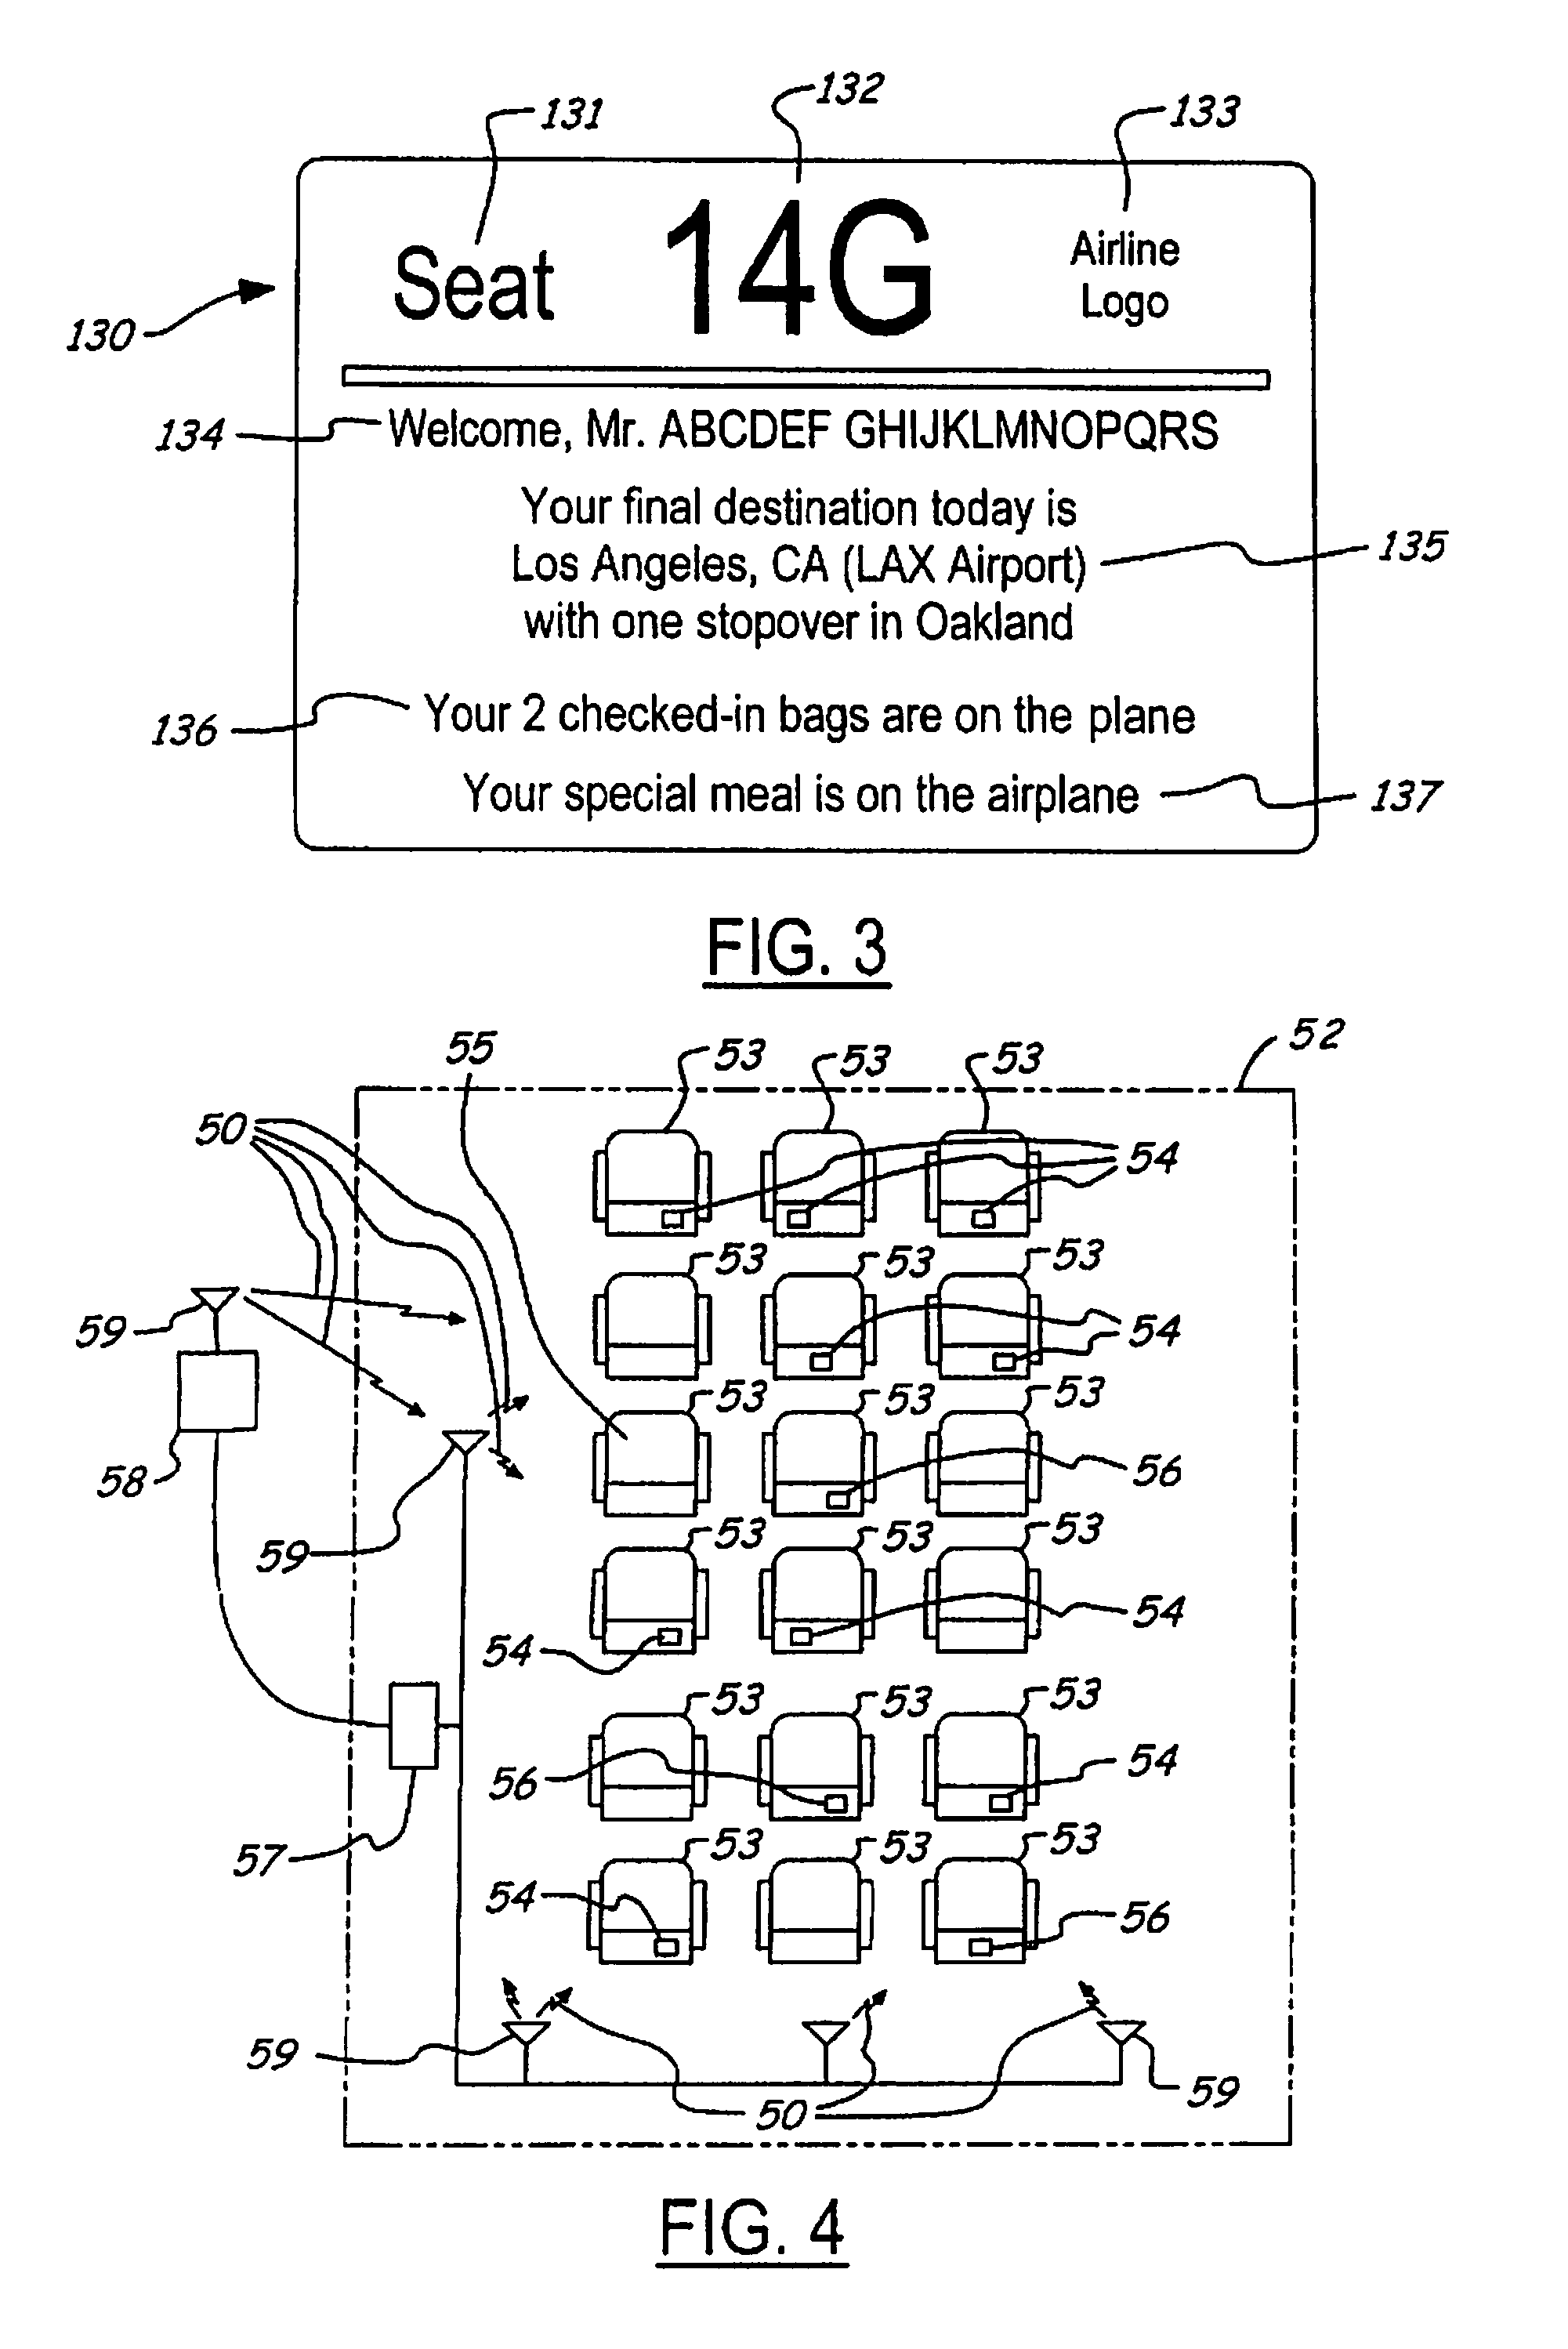 Dynamic seat labeling and passenger identification system